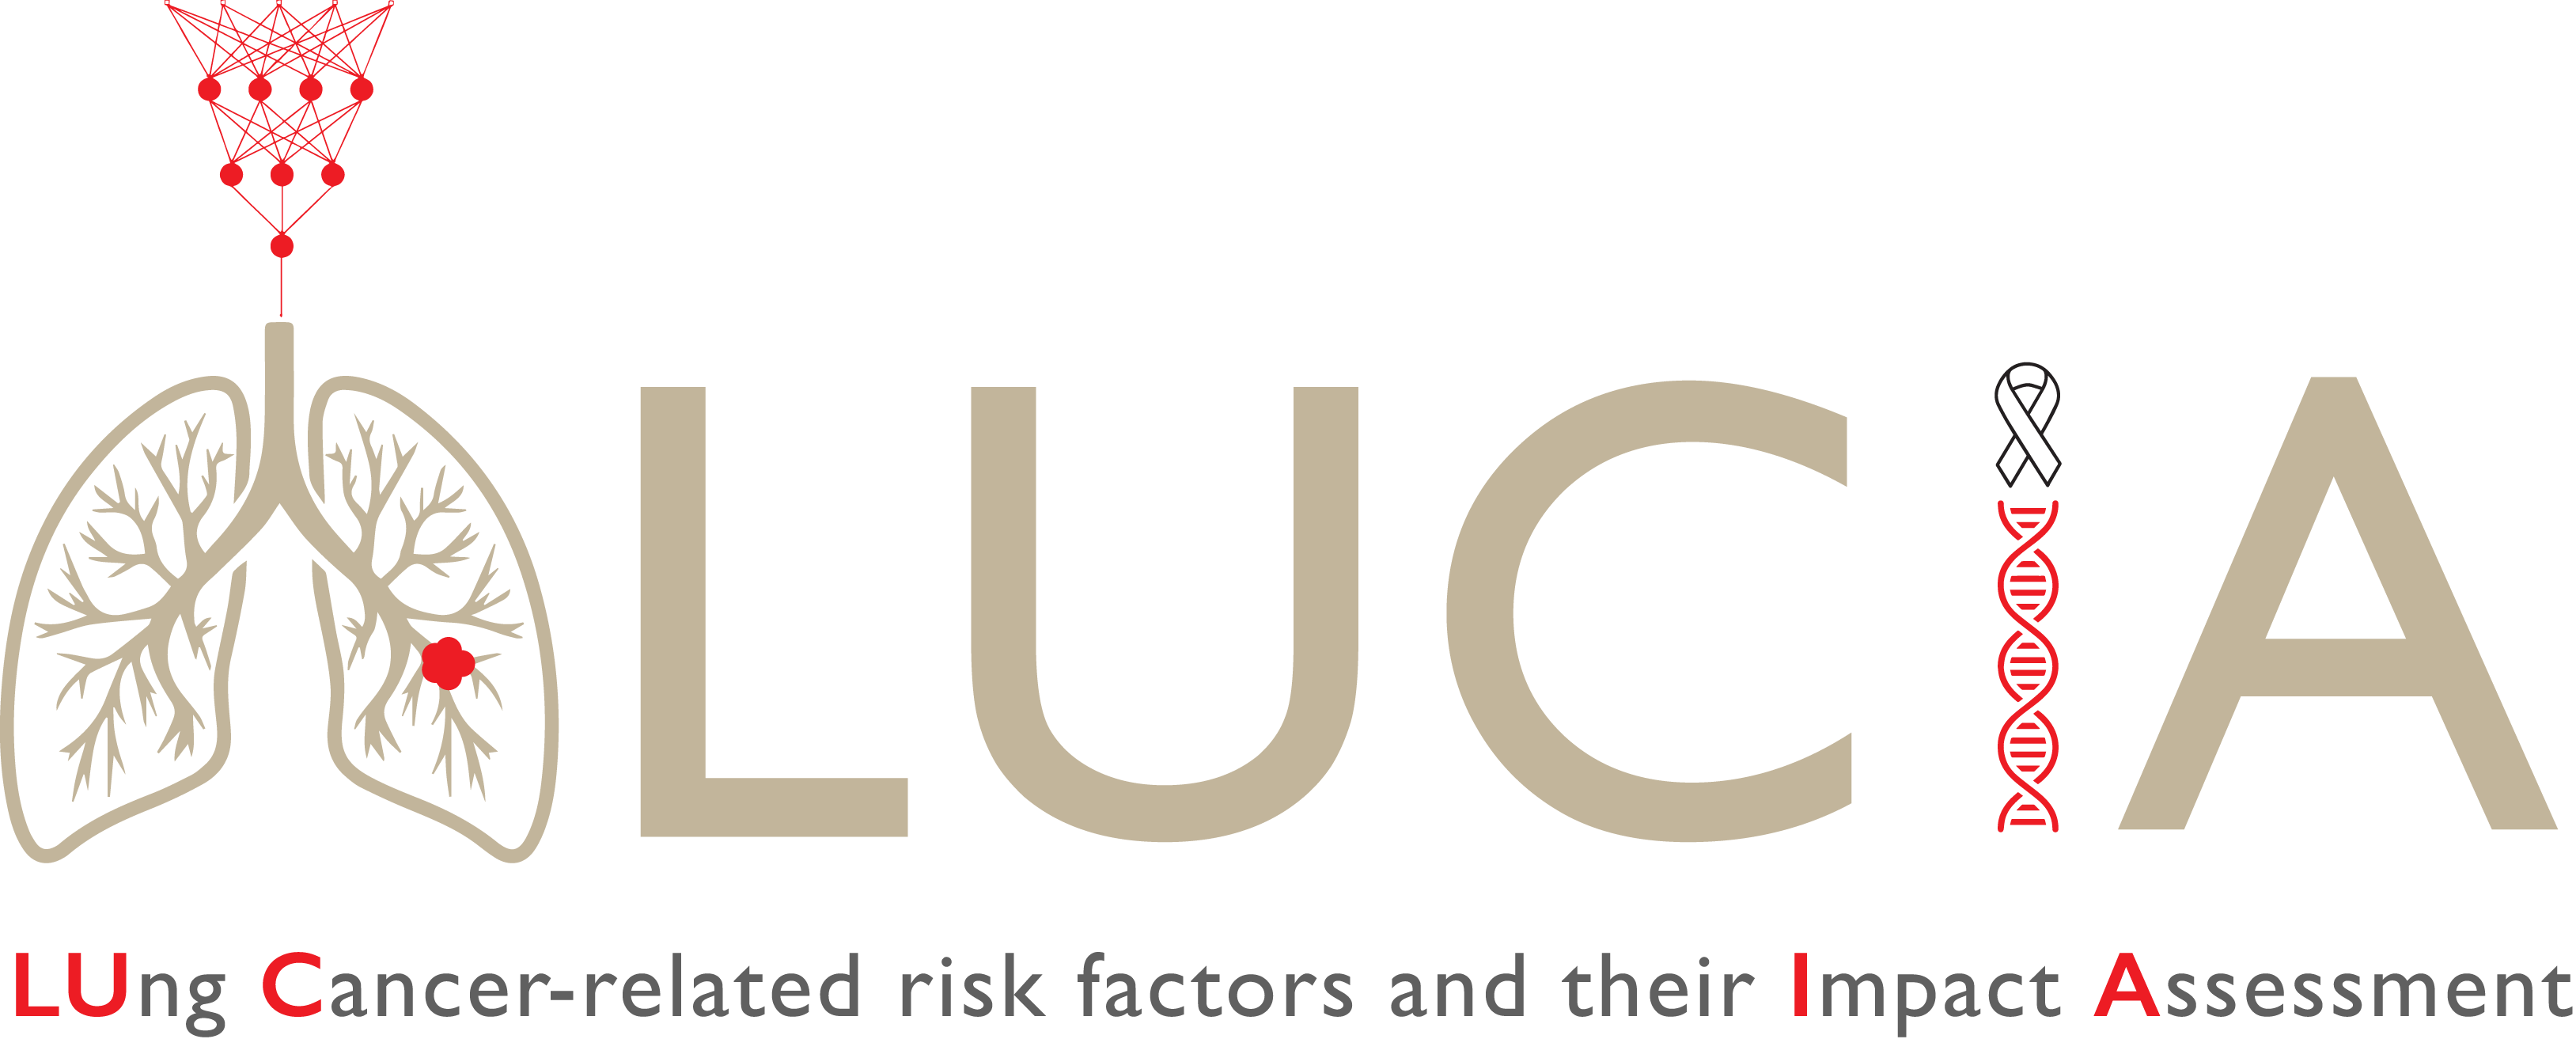 LUCIA. Study of risk factors for the improvement of lung cancer early detection and management strategies. 